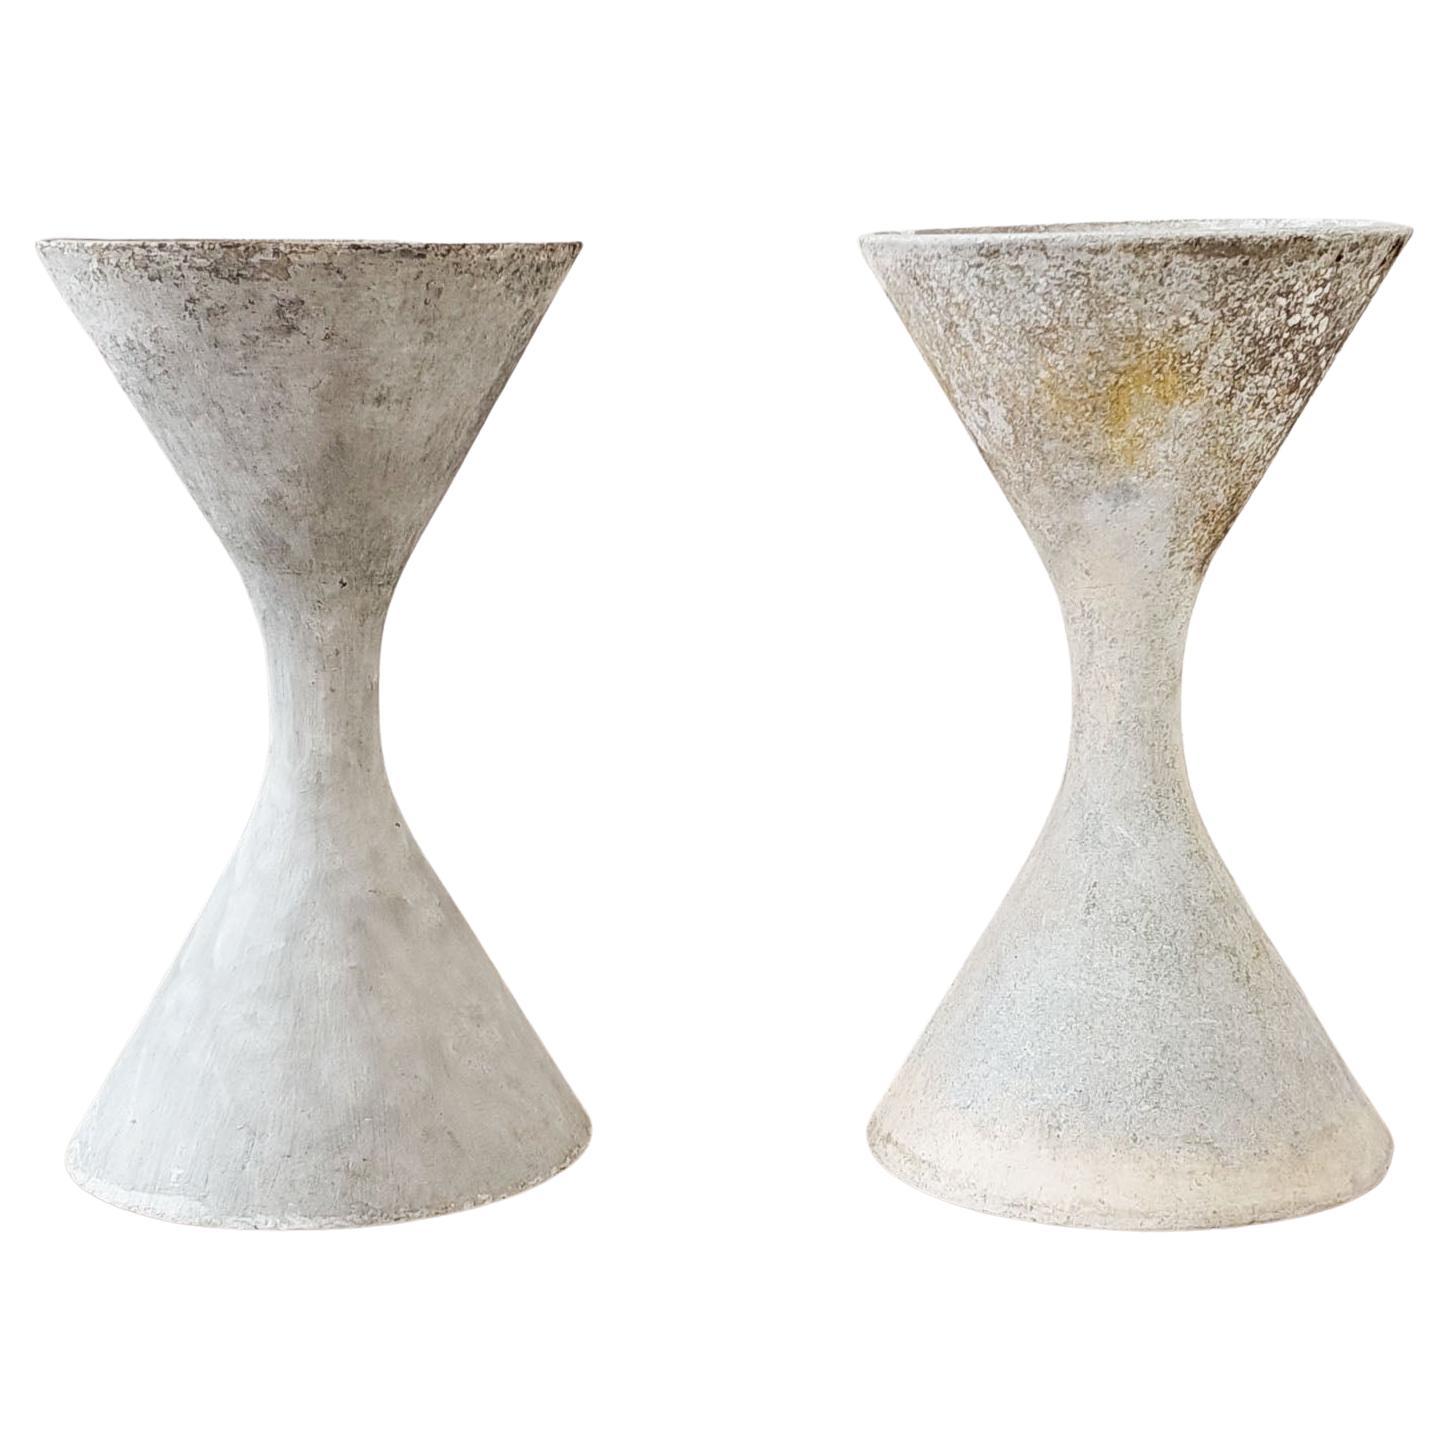 Pair of Willy Guhl Diablo Hourglass Planters by Eternit For Sale